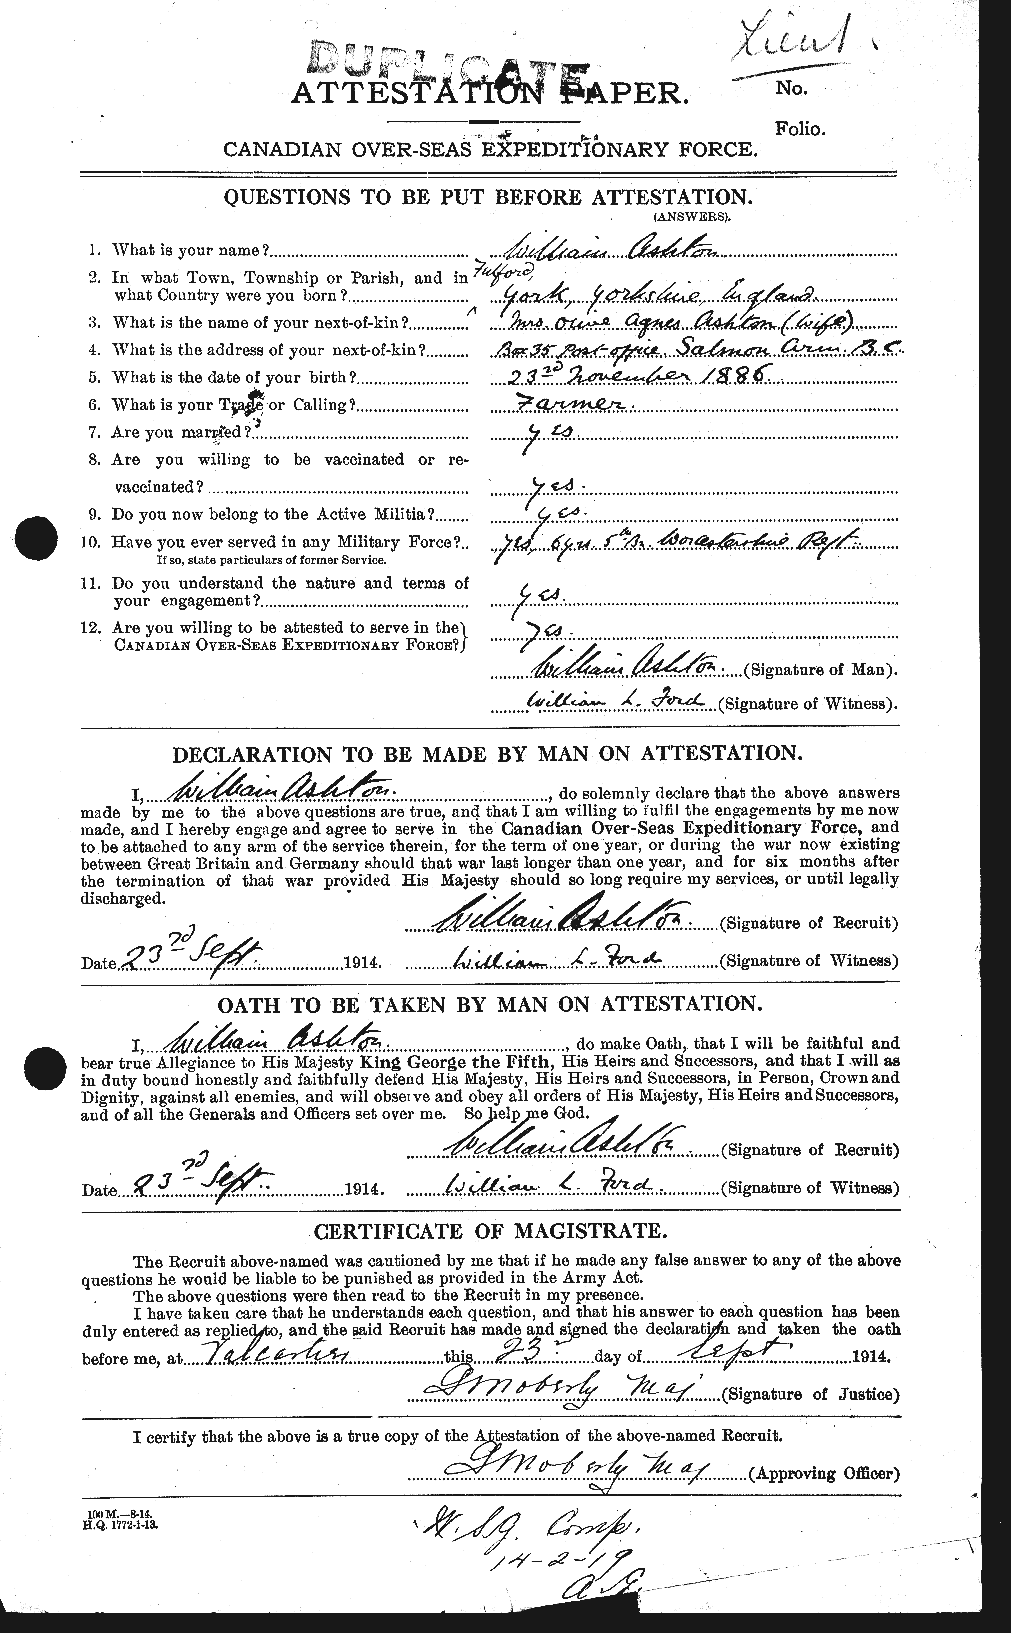 Personnel Records of the First World War - CEF 223787a